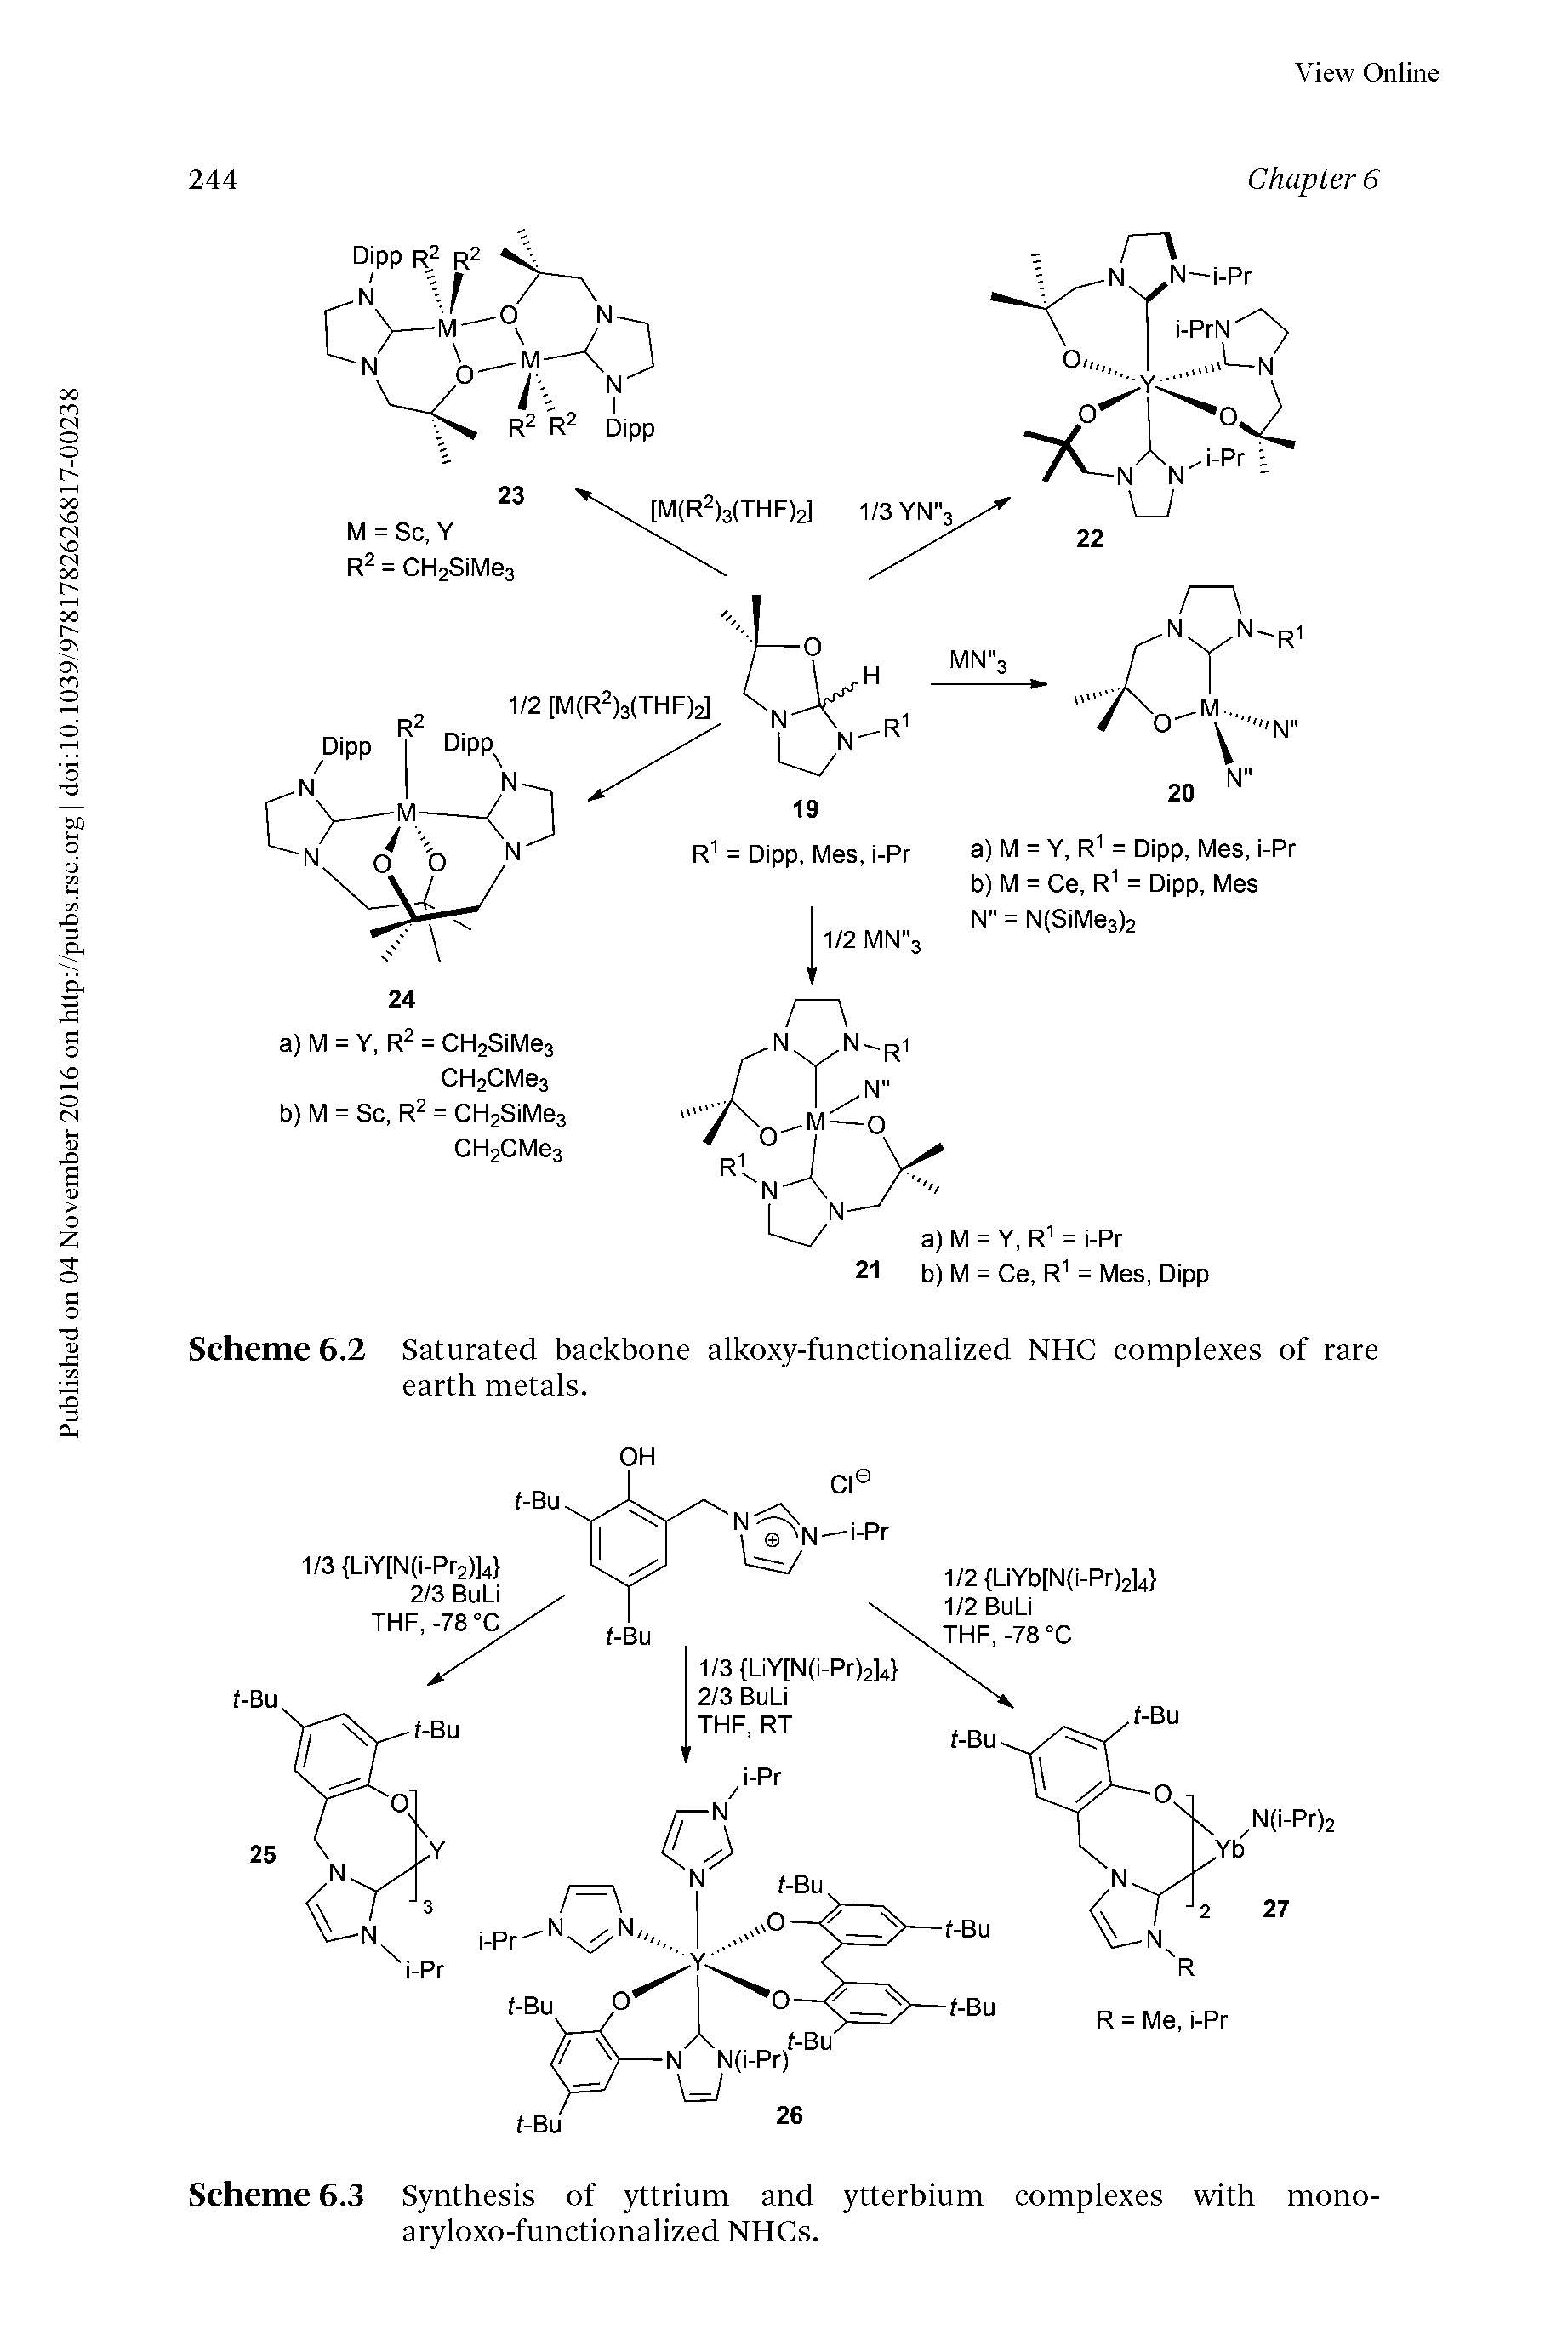 Scheme 6.2 Saturated backbone alkoxy-functionalized NHC complexes of rare earth metals.